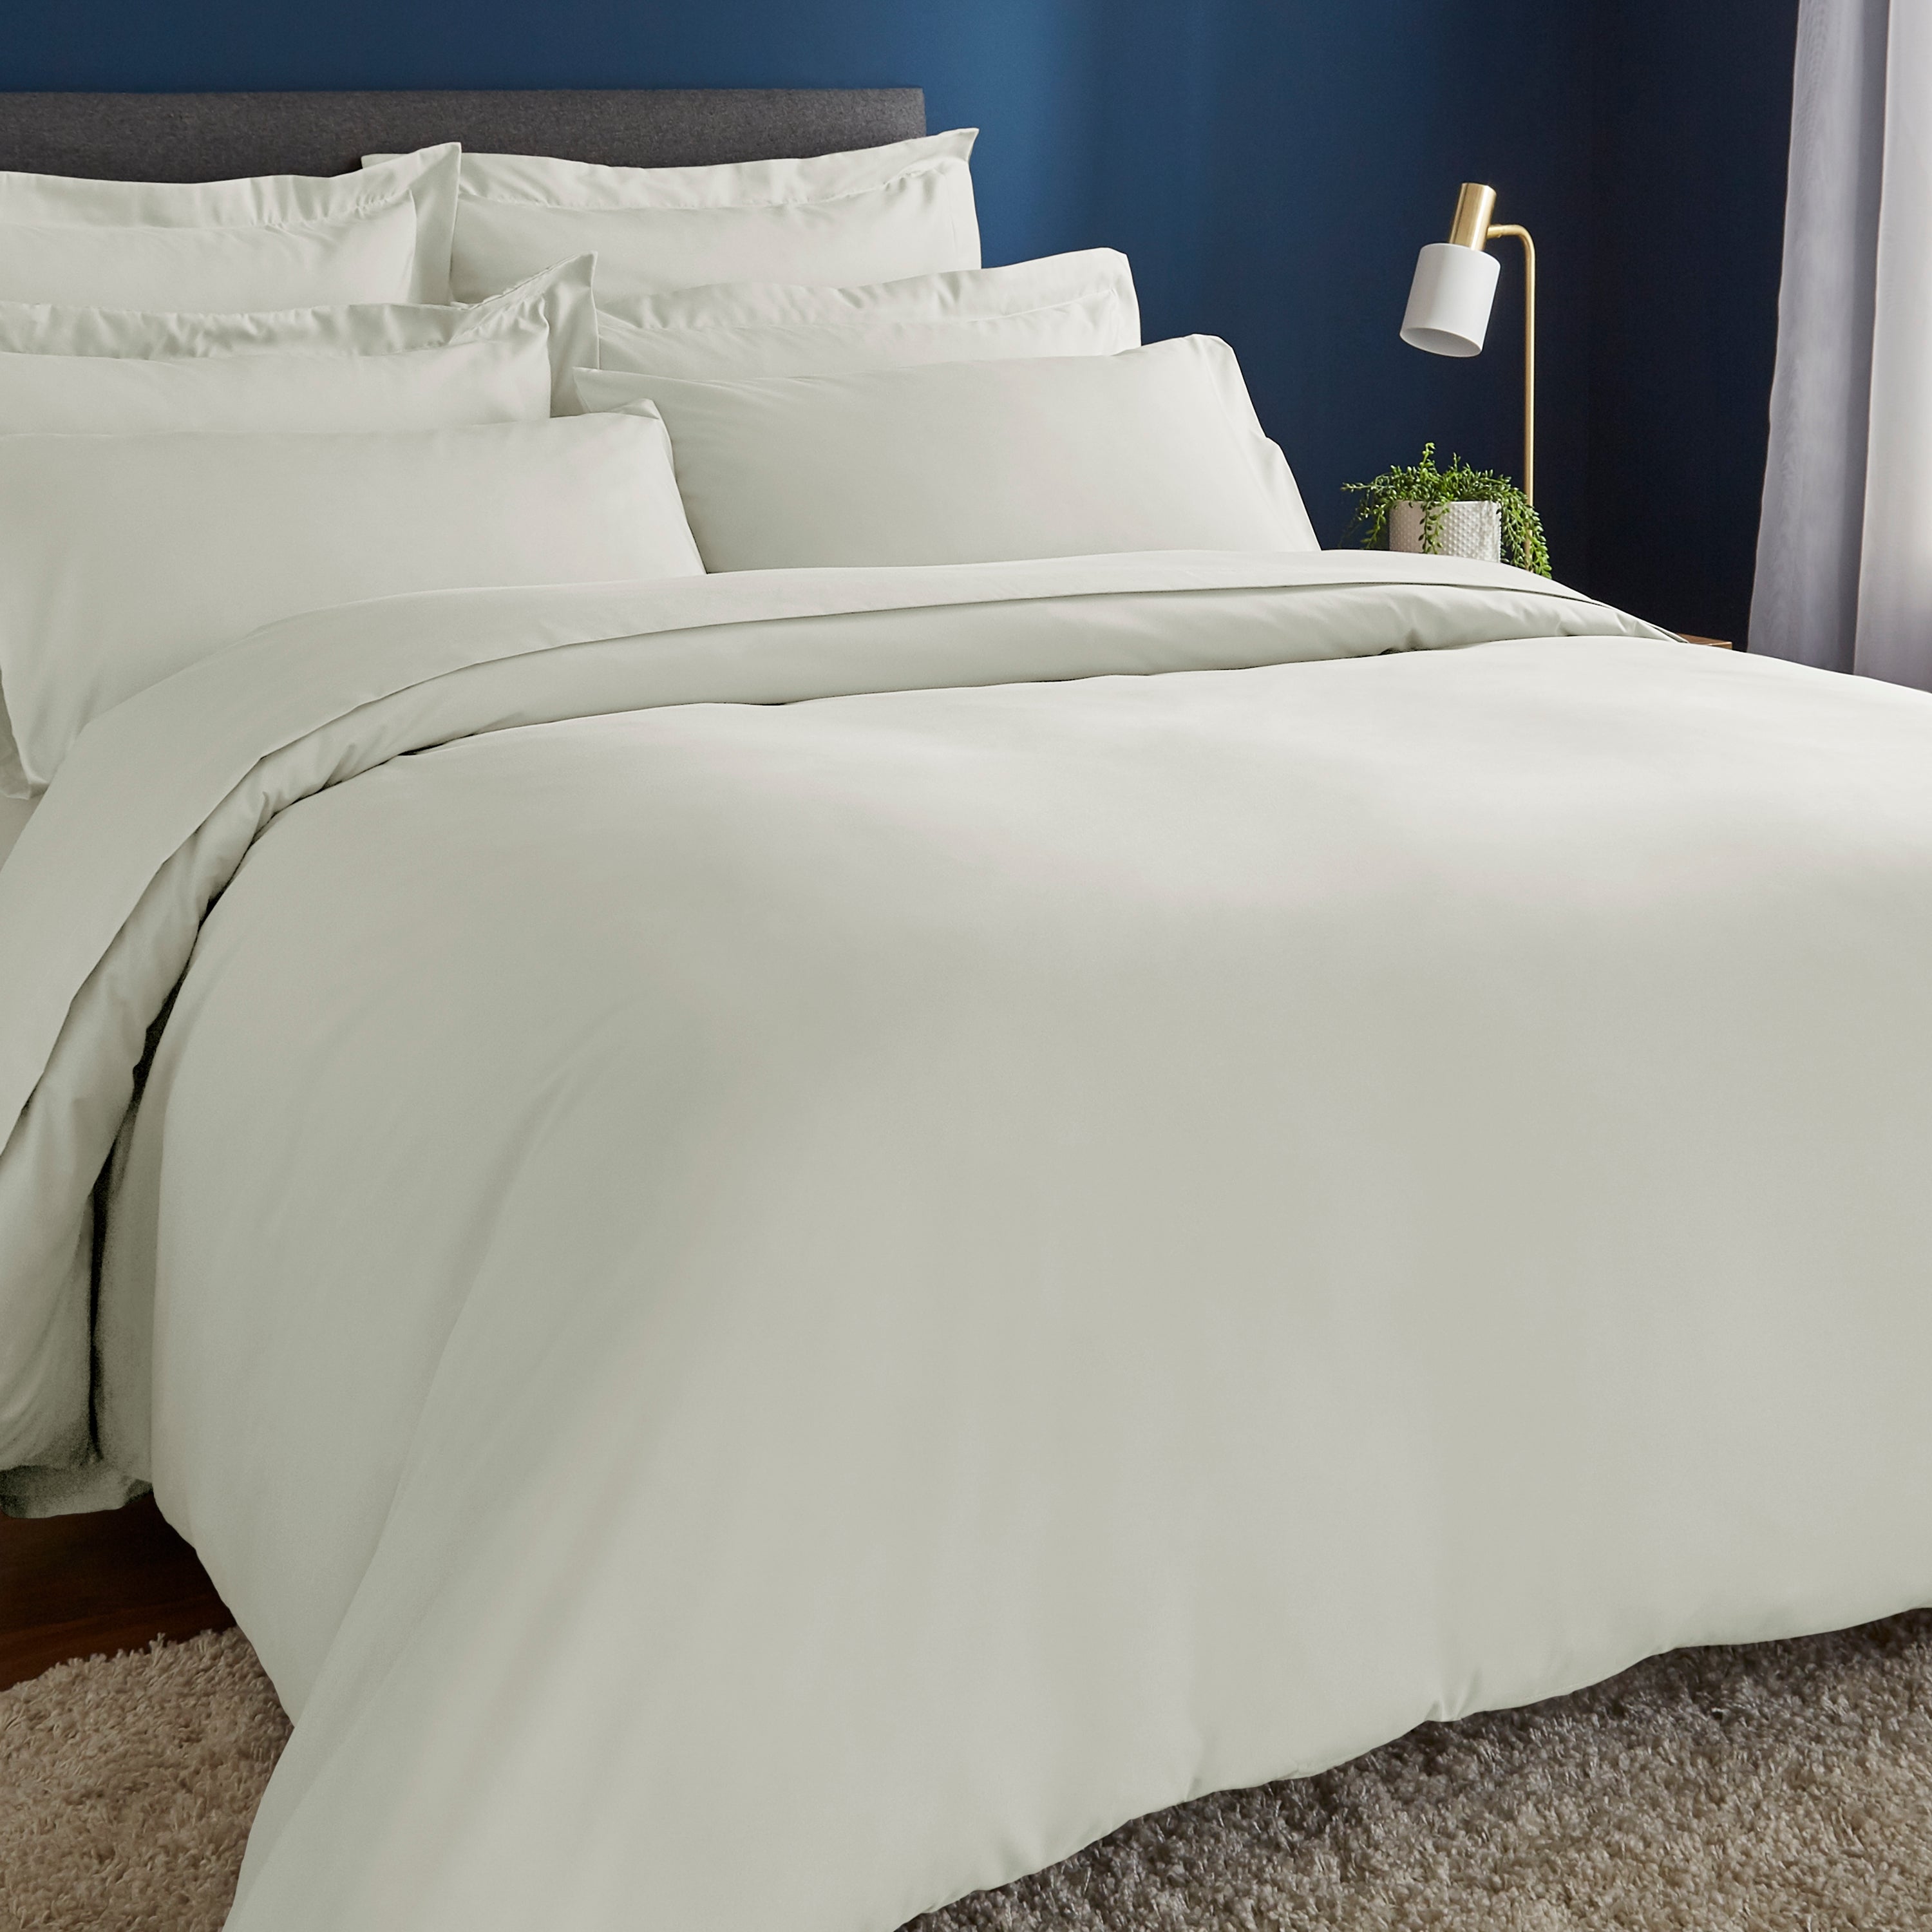 Fogarty Soft Touch Natural Duvet Cover And Pillowcase Set Cream